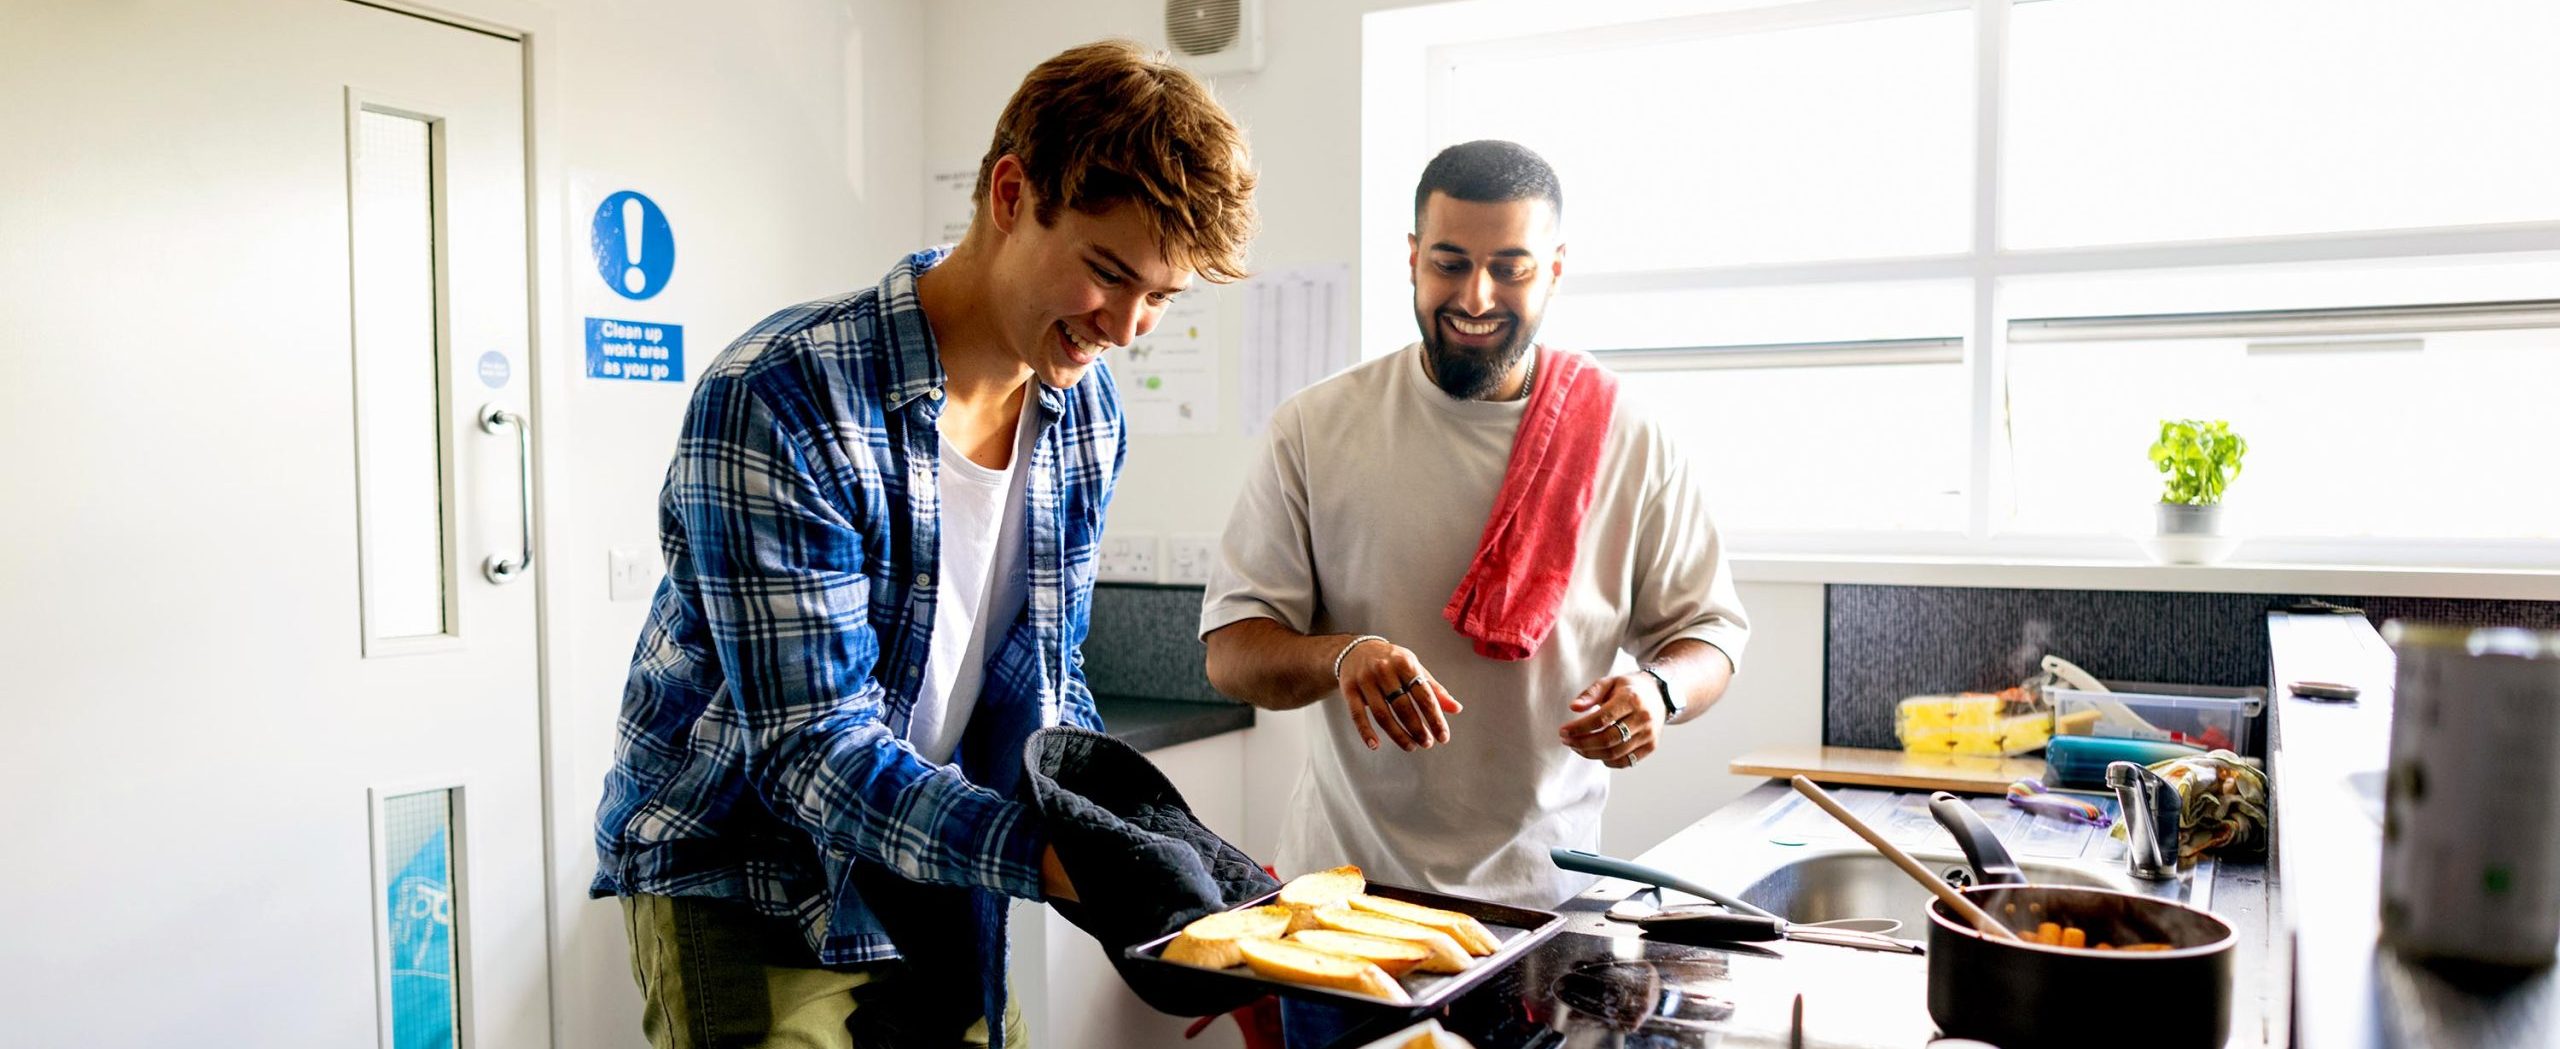 Two young men smile while cooking, one holding a pan of sliced bread with an oven mitt.